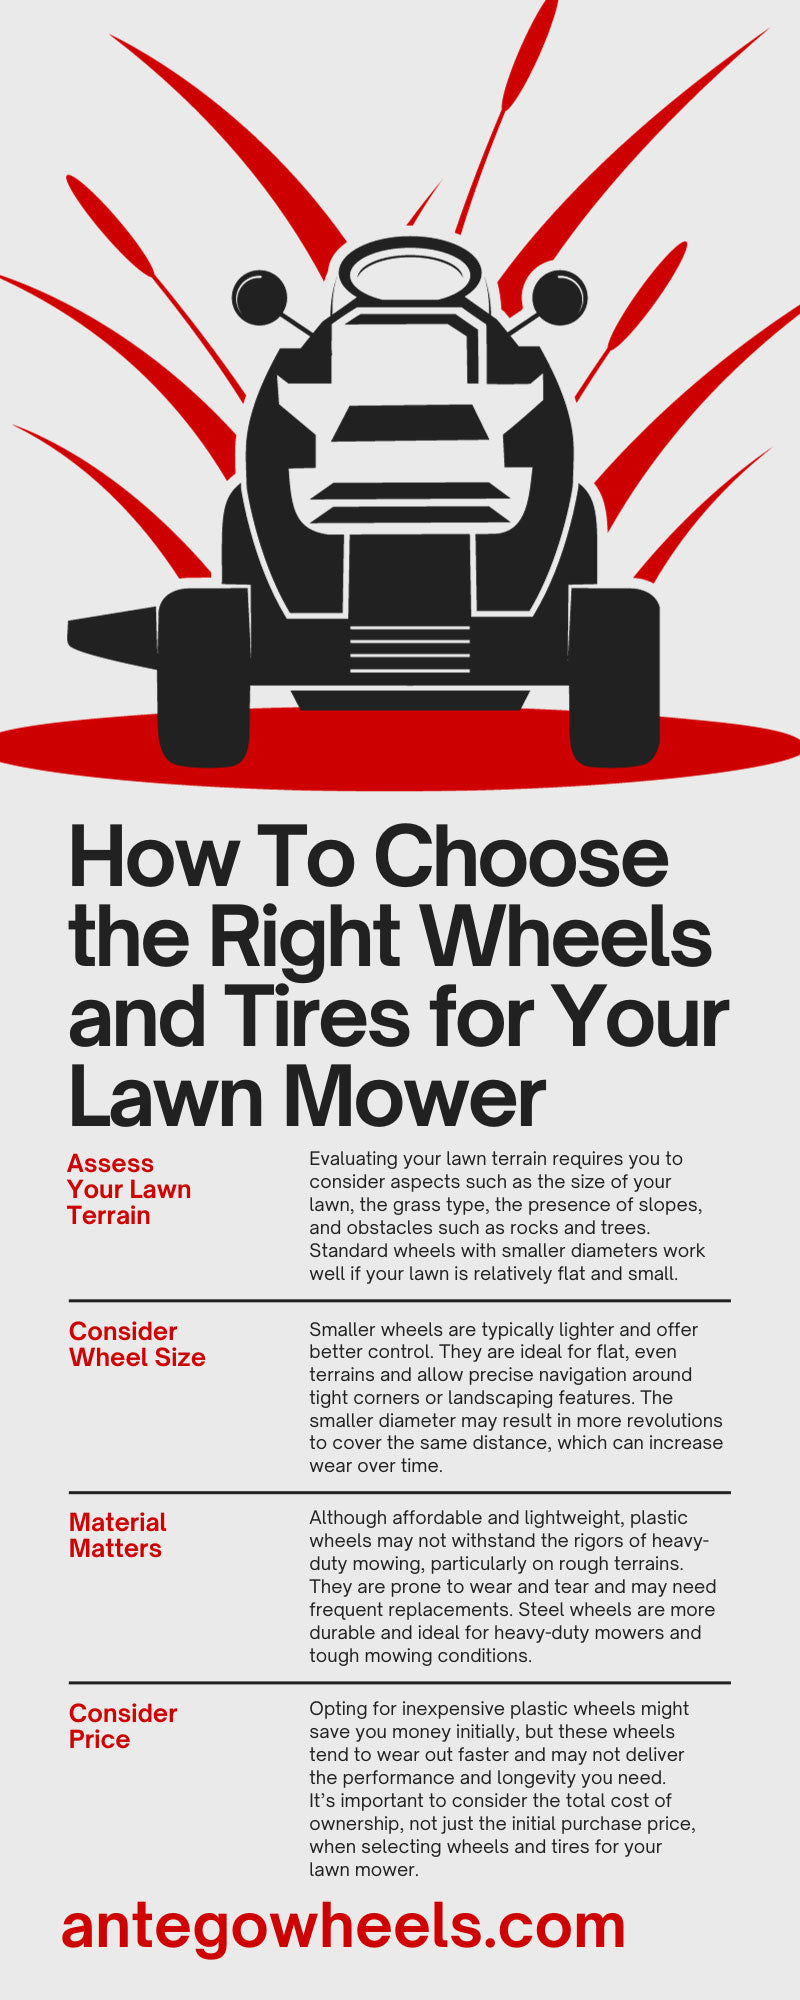 How To Choose the Right Wheels and Tires for Your Lawn Mower